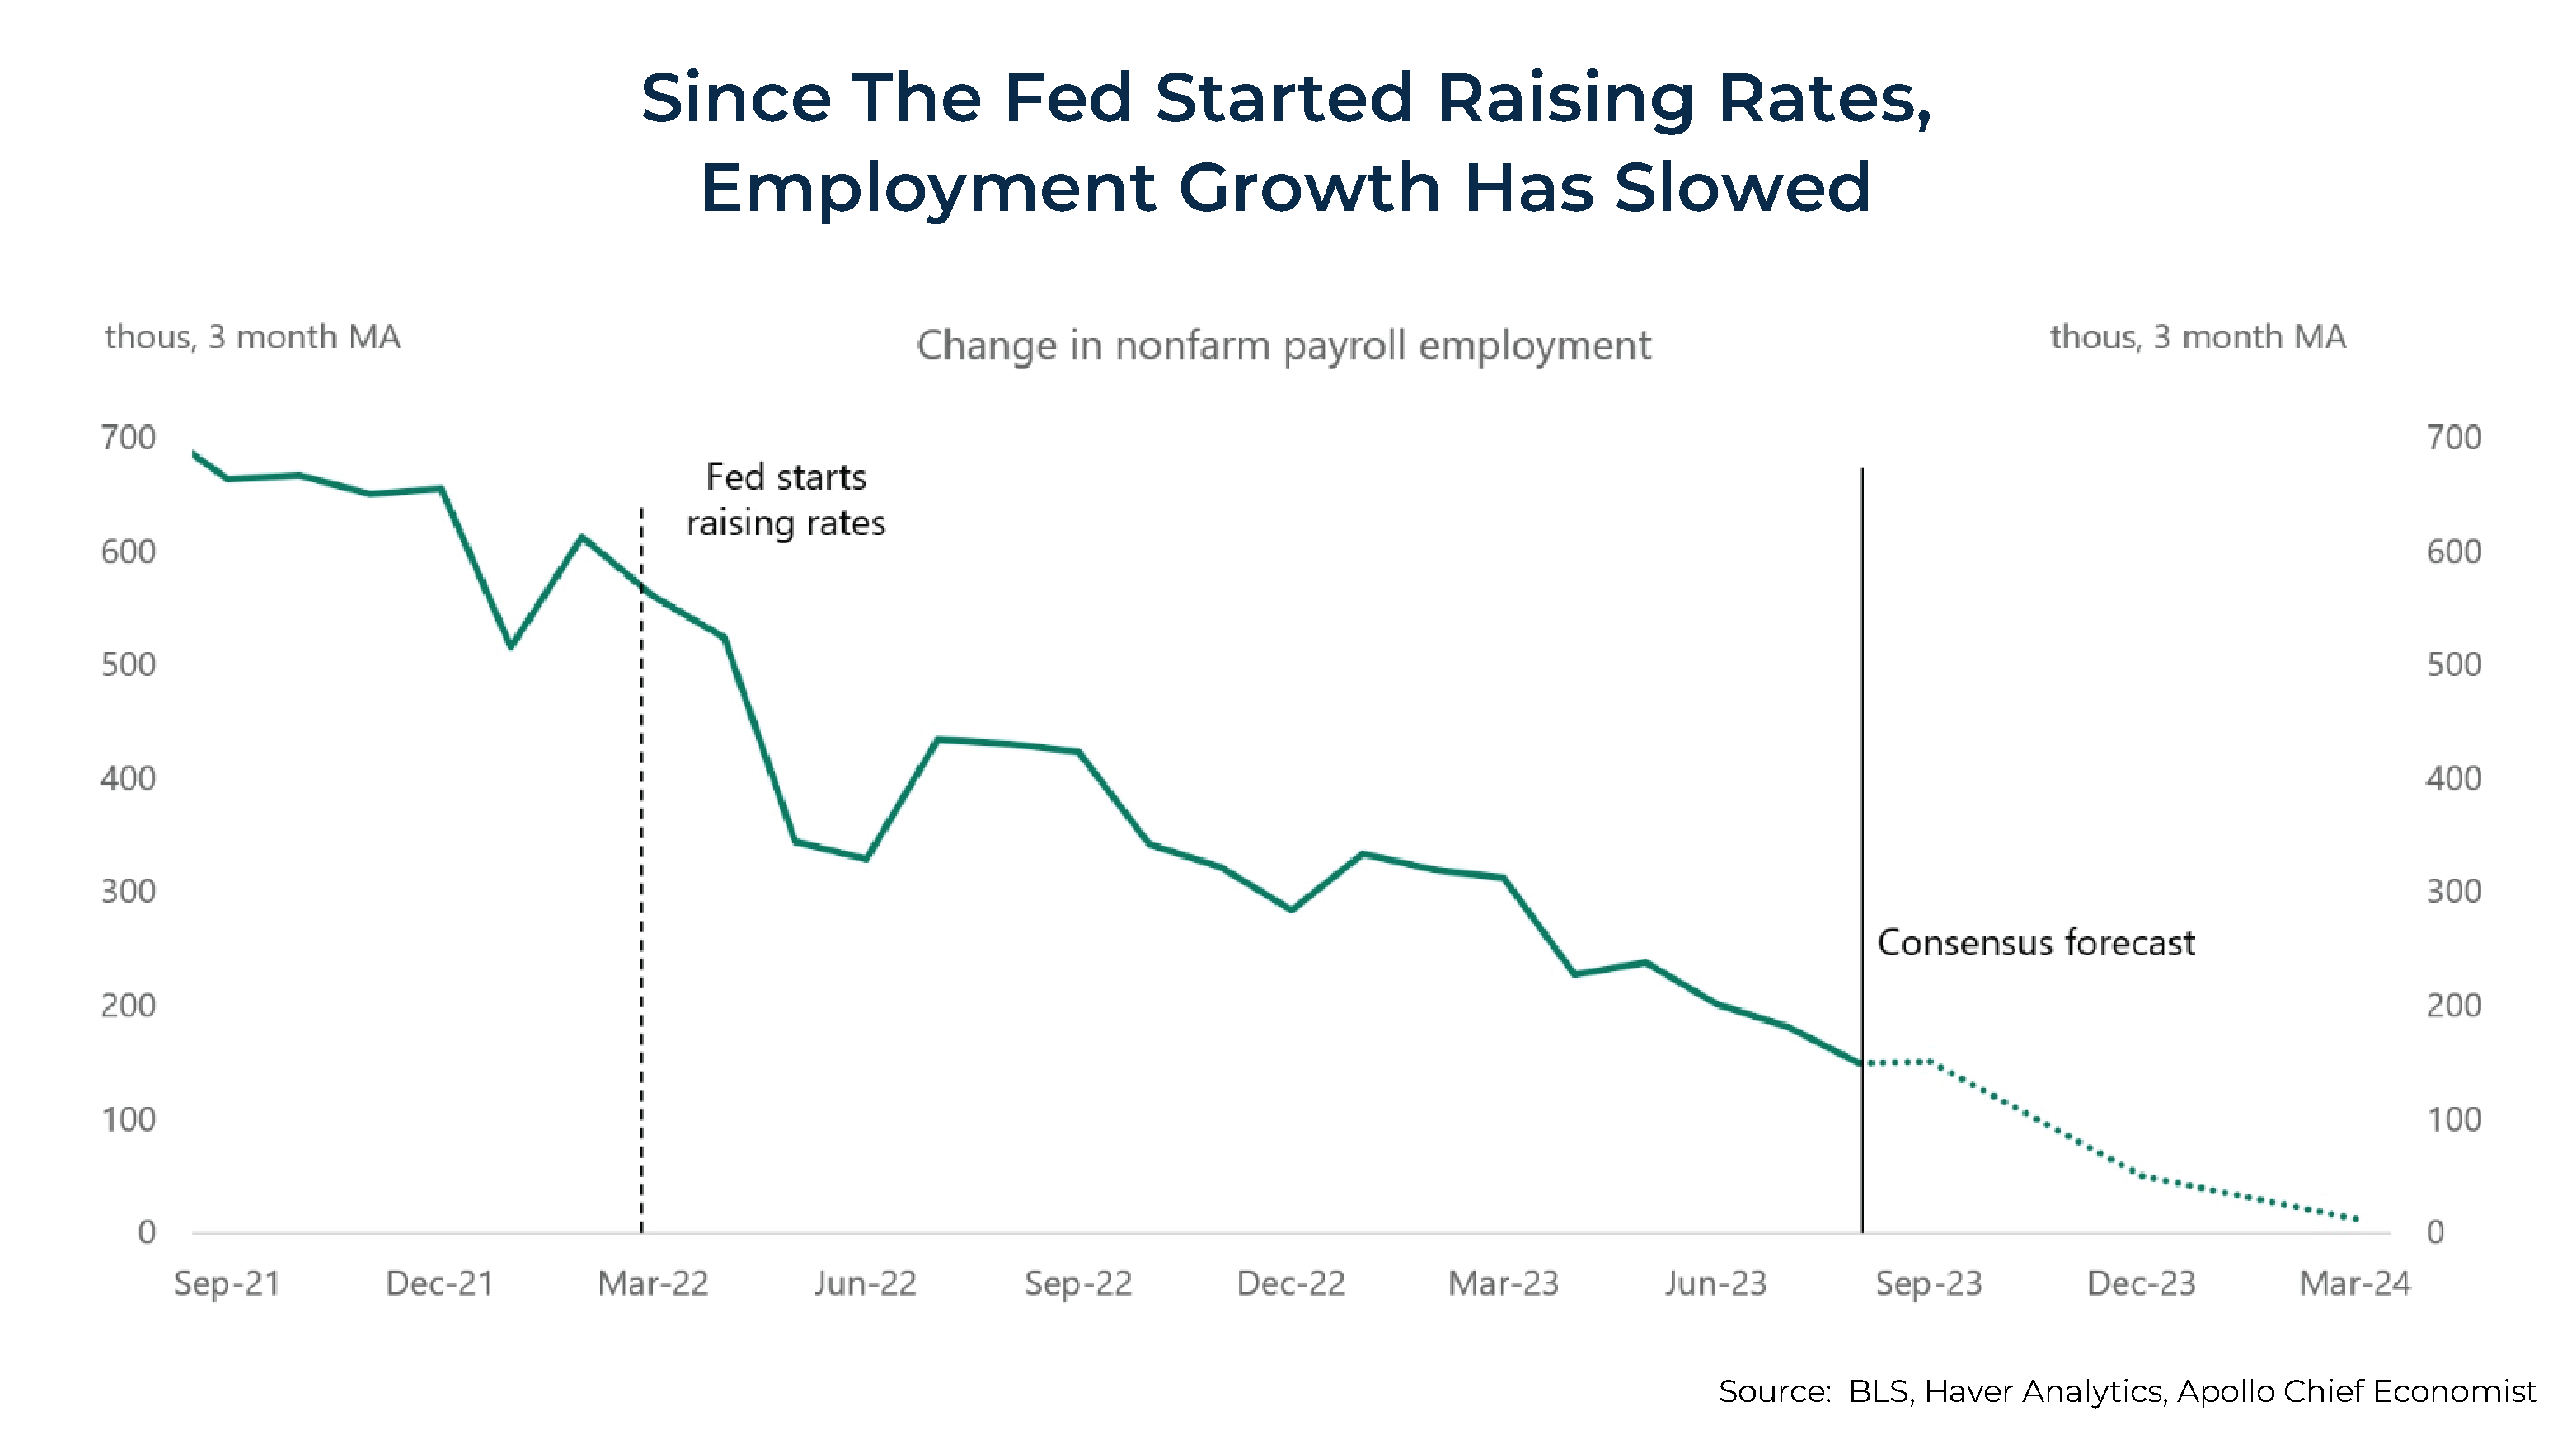 Since the Fed started raising rates employment growth has slowed